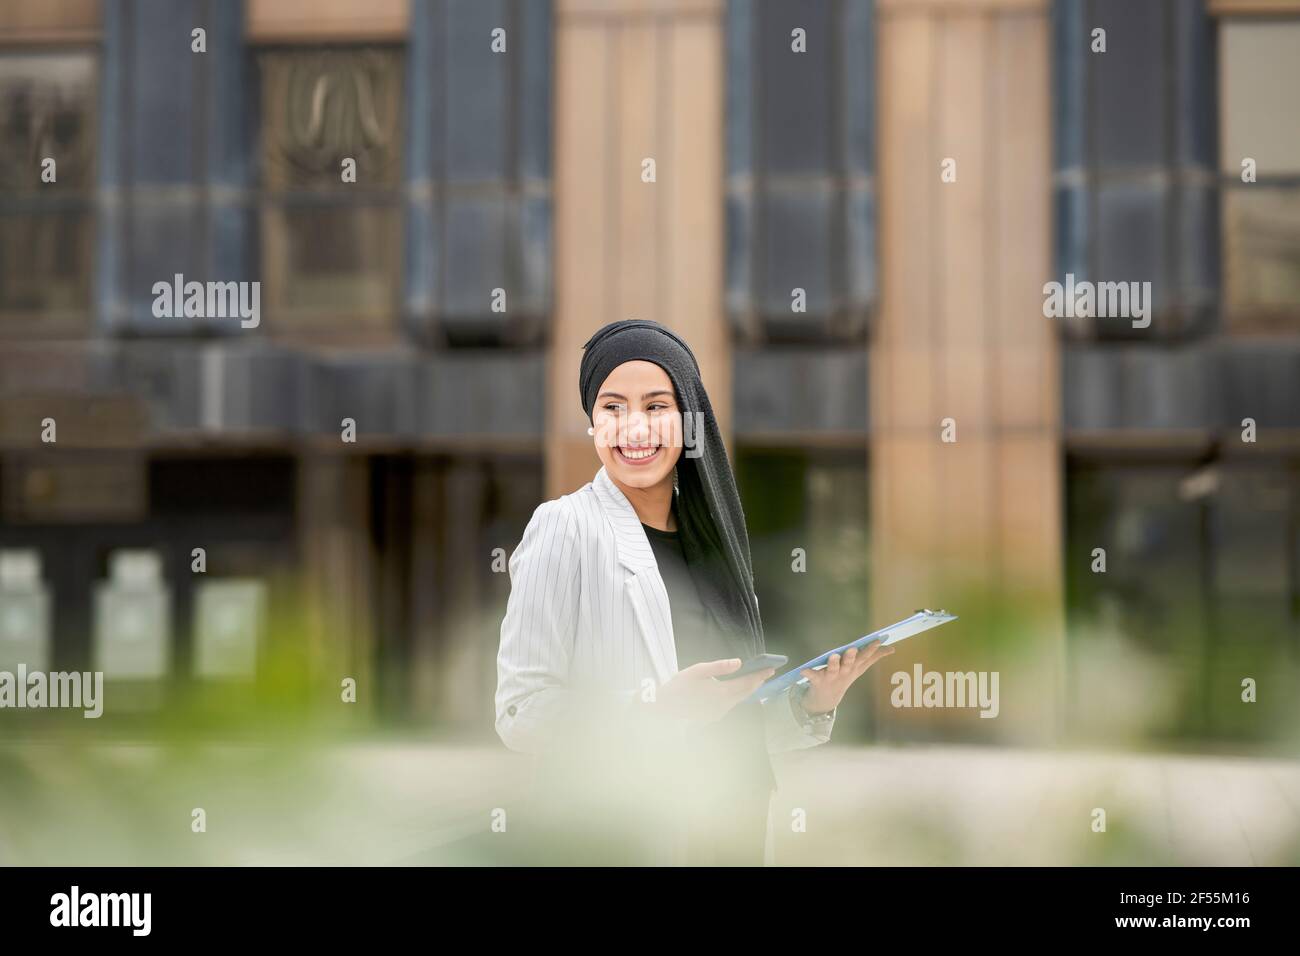 Smiling Arab businesswoman looking away while standing outdoors Stock Photo